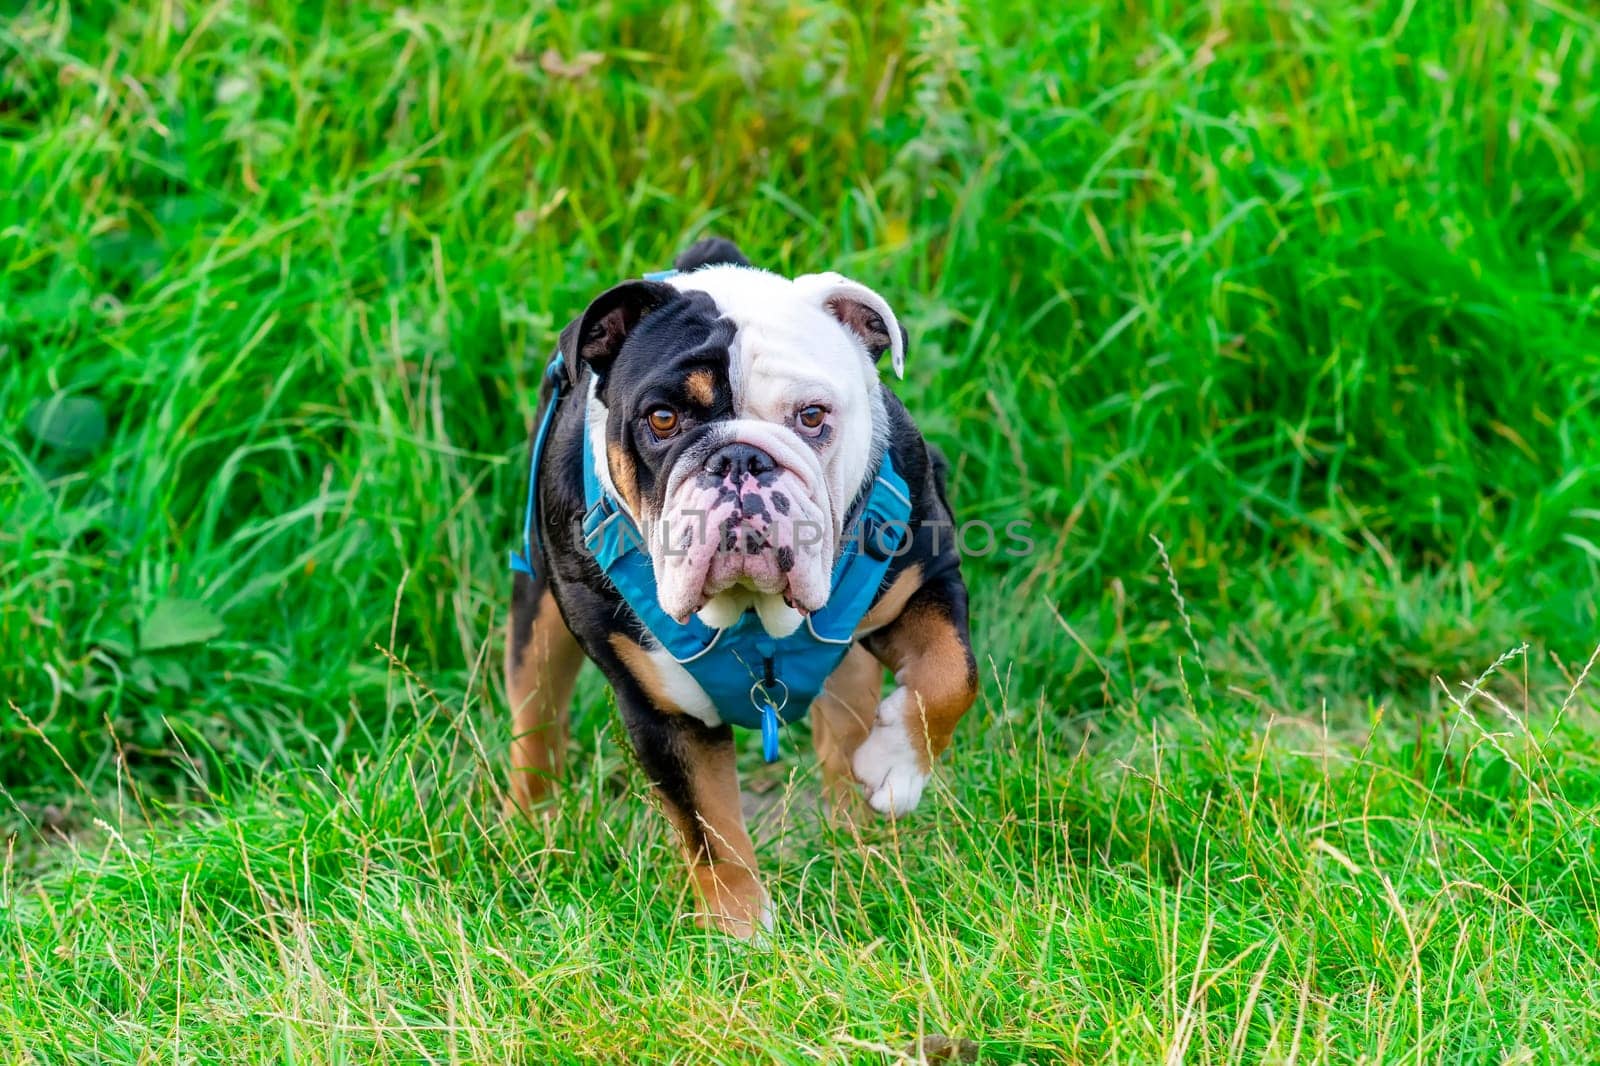 Black tri-color funny English British Bulldog Dog out for a walk looking up sitting in the grass in forest on Autumn sunny day at sunset